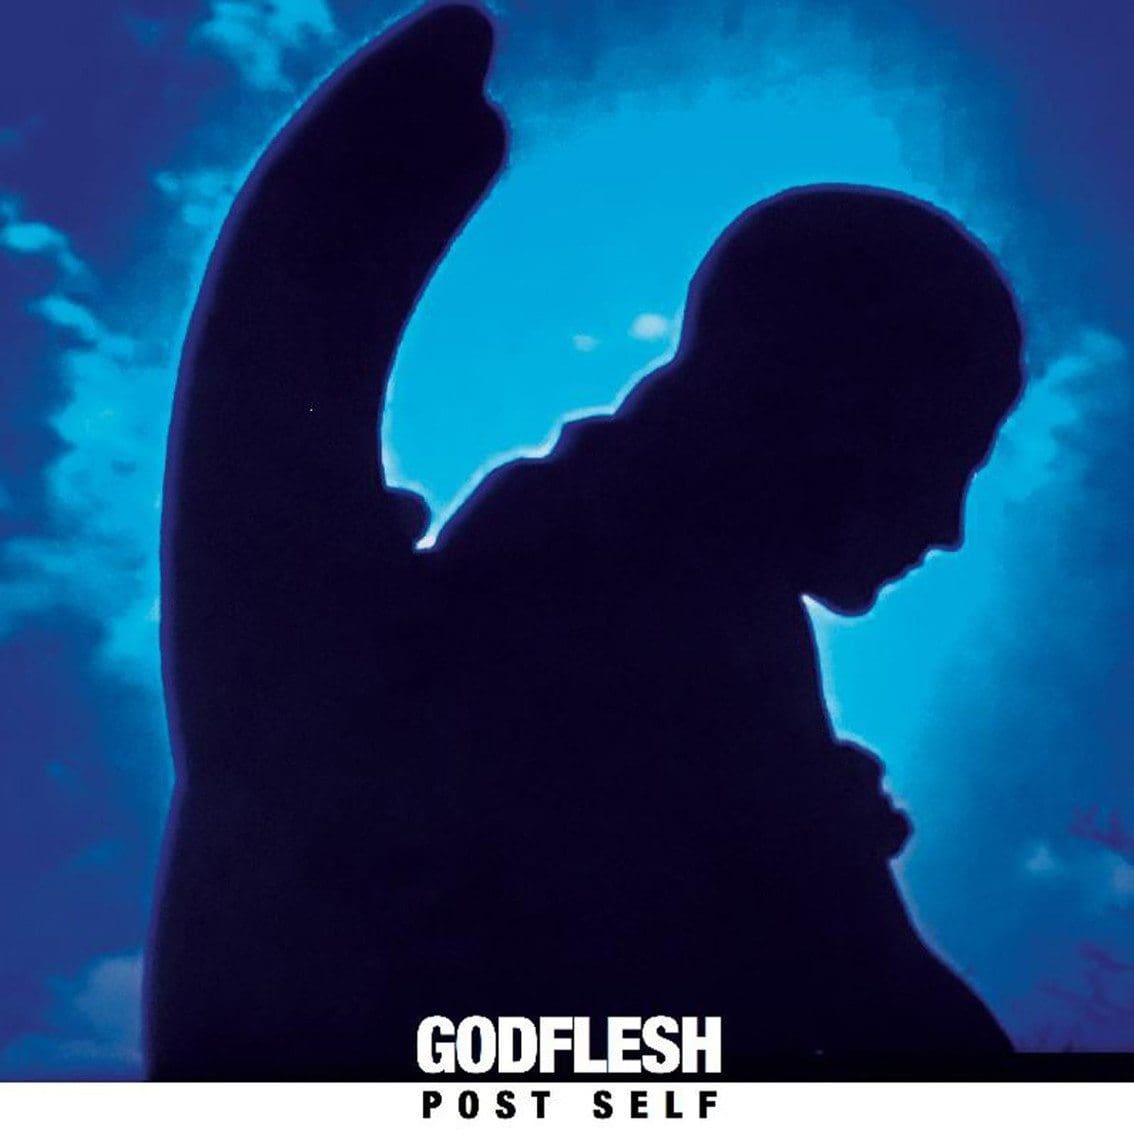 Godflesh returns with a brand new album:'Post Self' - available now on vinyl and CD